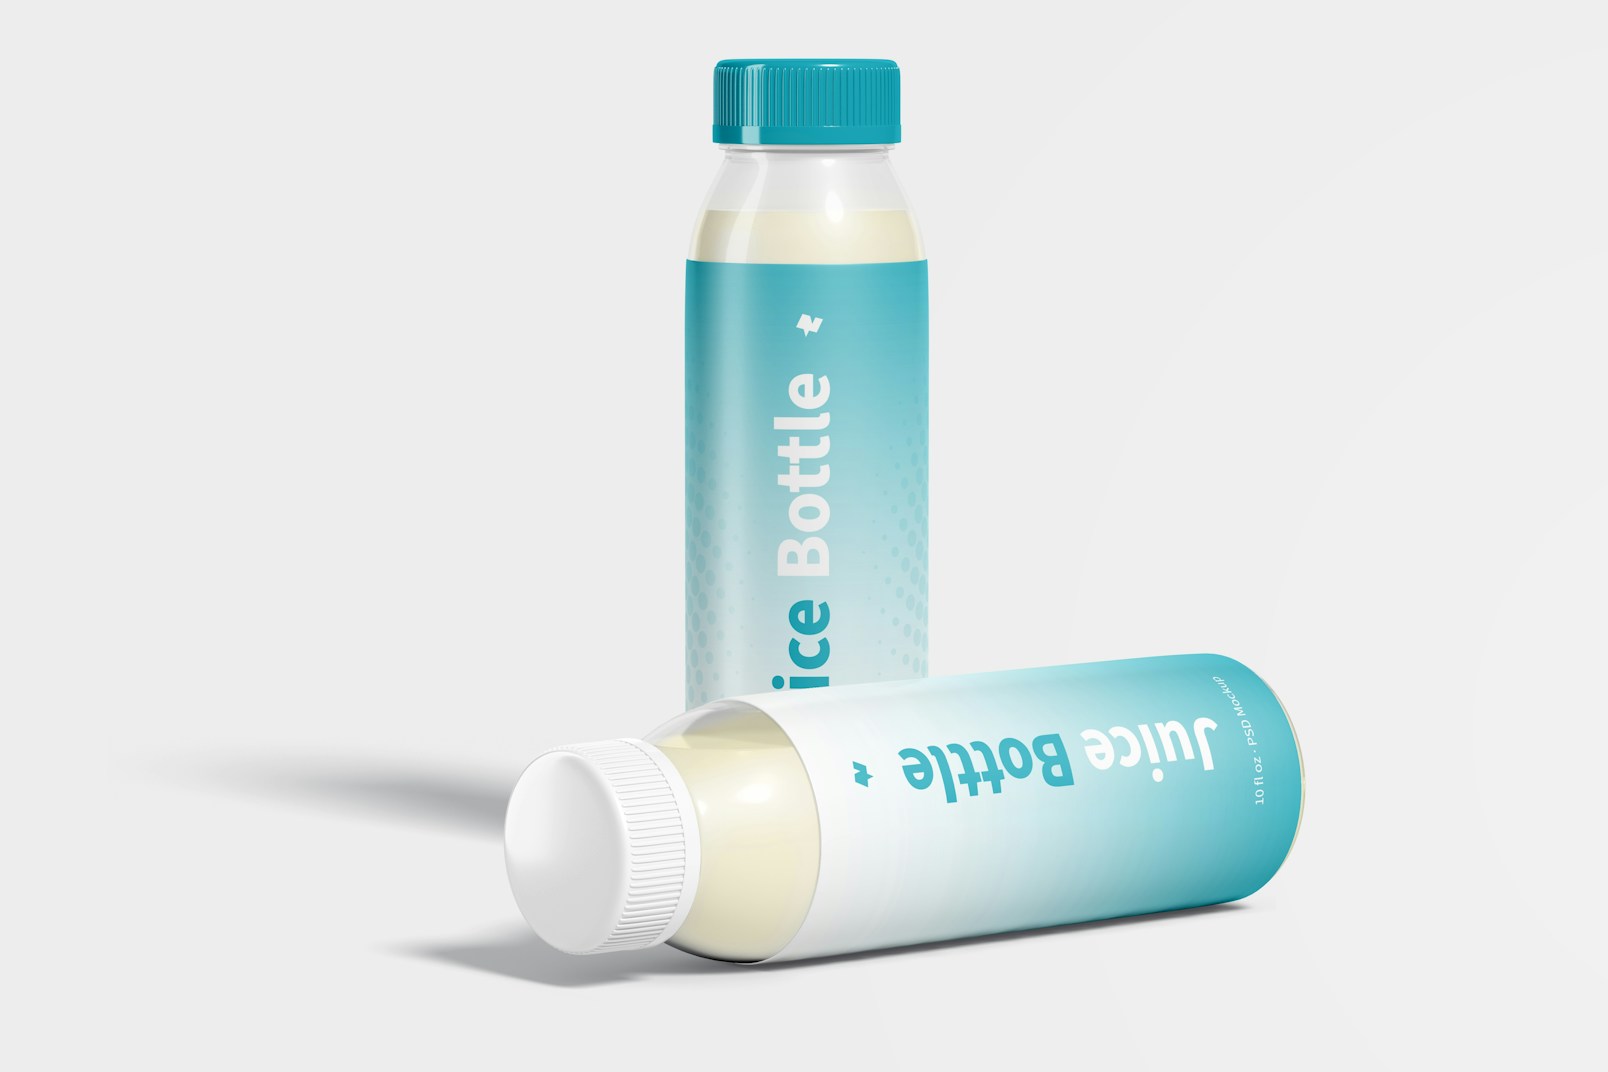 10 oz Clear PET Juice Bottles Mockup, Standing and Dropped